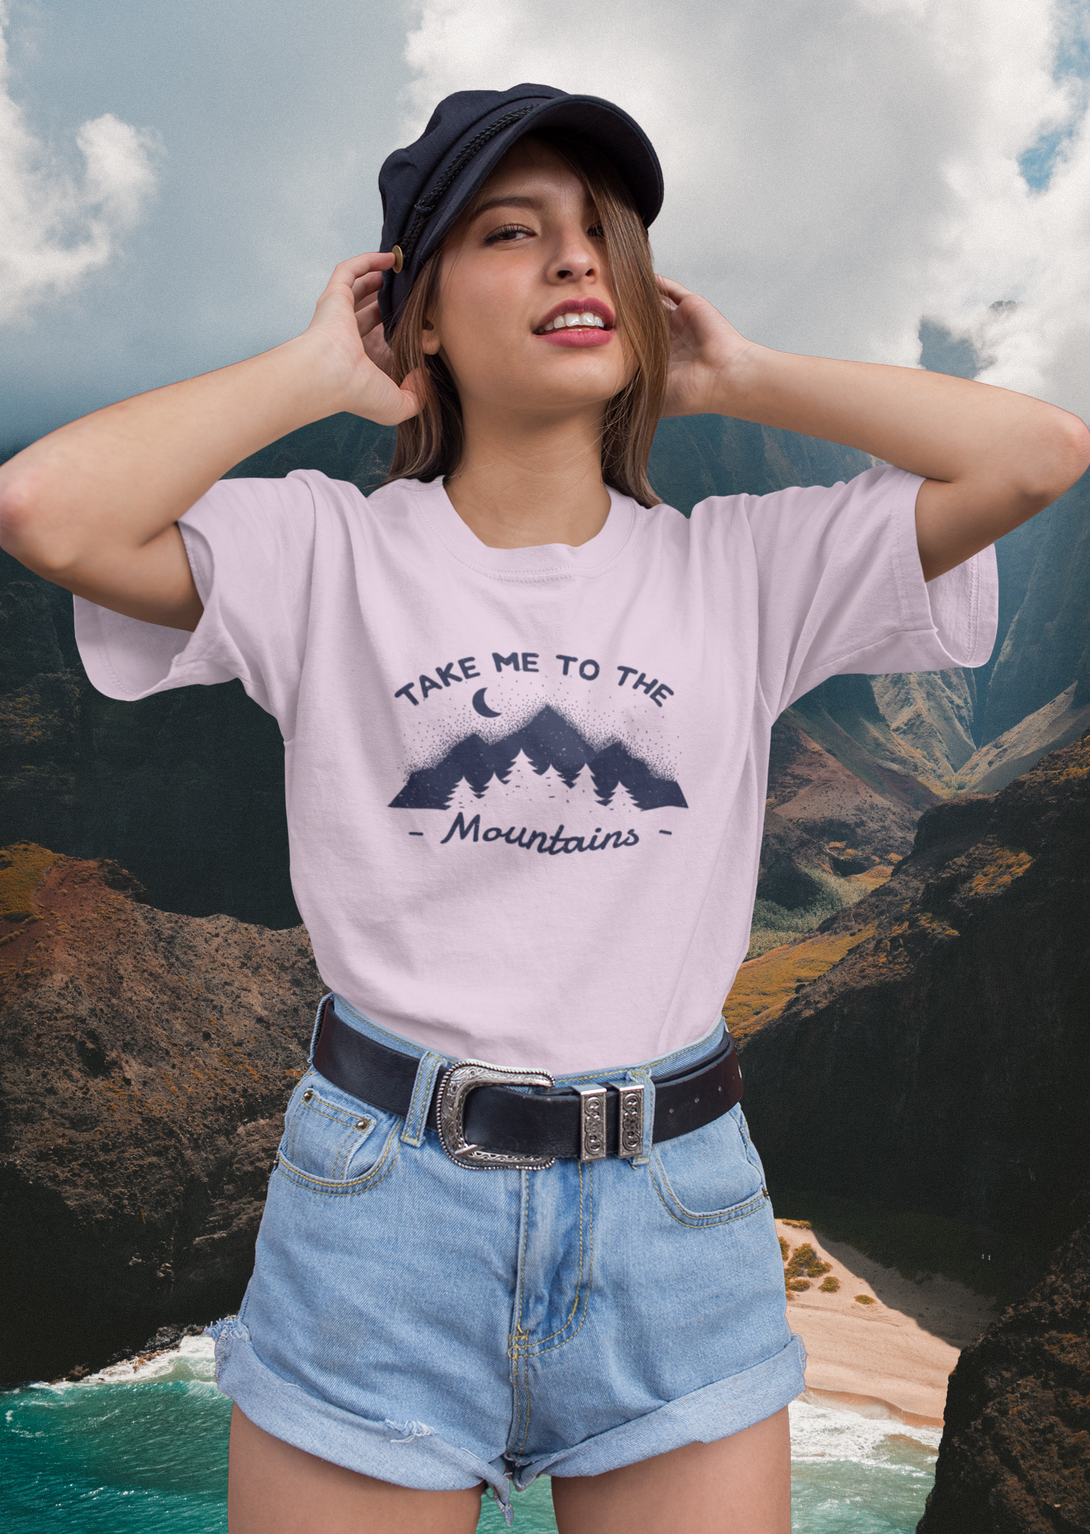 Take Me To The Mountains Printed T-Shirt For Women - WowWaves - 8